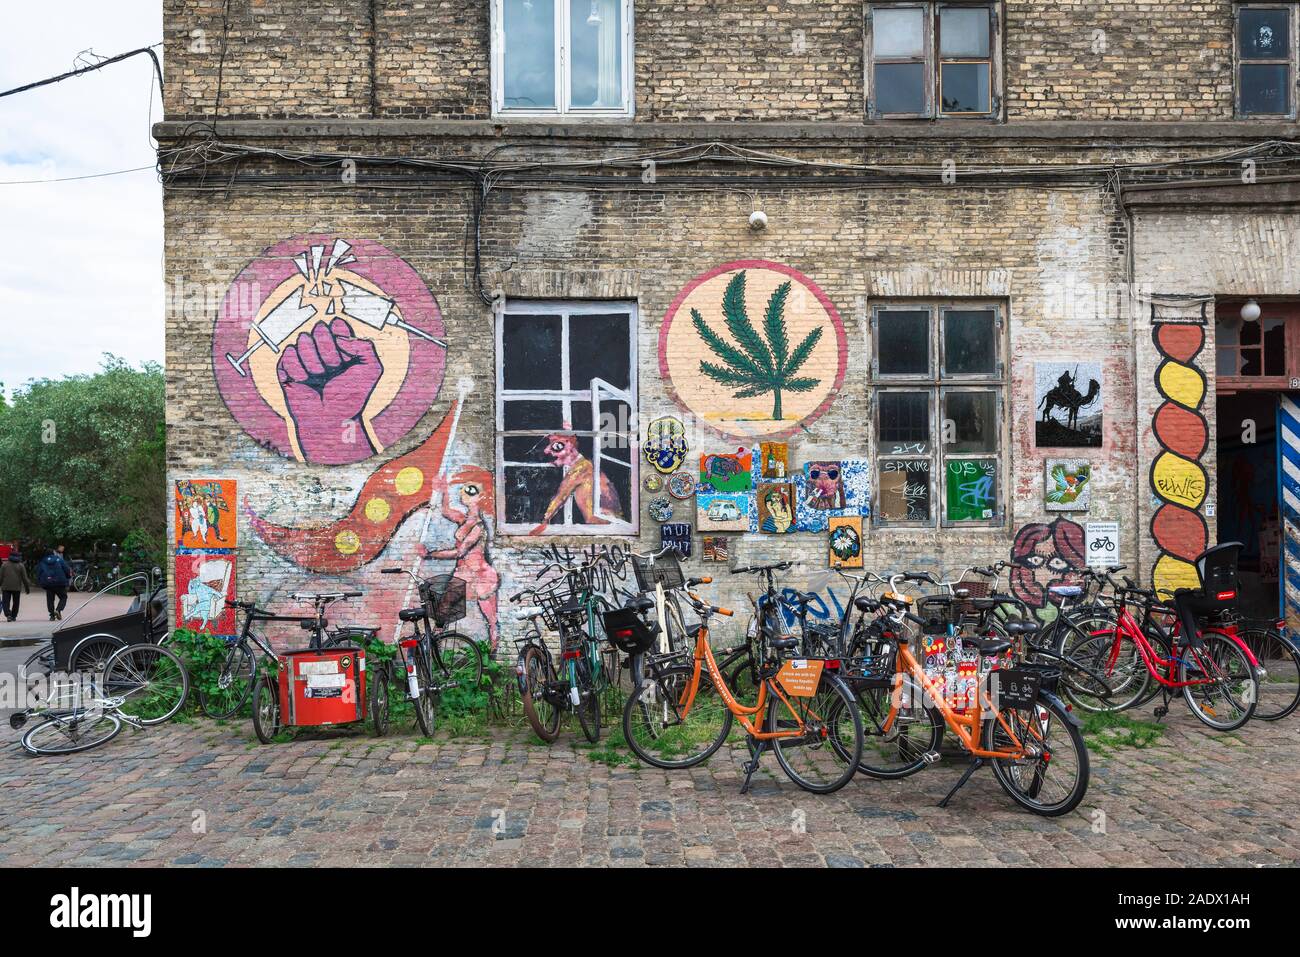 Christiania Freetown, view of an illustrated building and parked bicycles in the alternative Freetown area of Christiania, Copenhagen, Denmark. Stock Photo